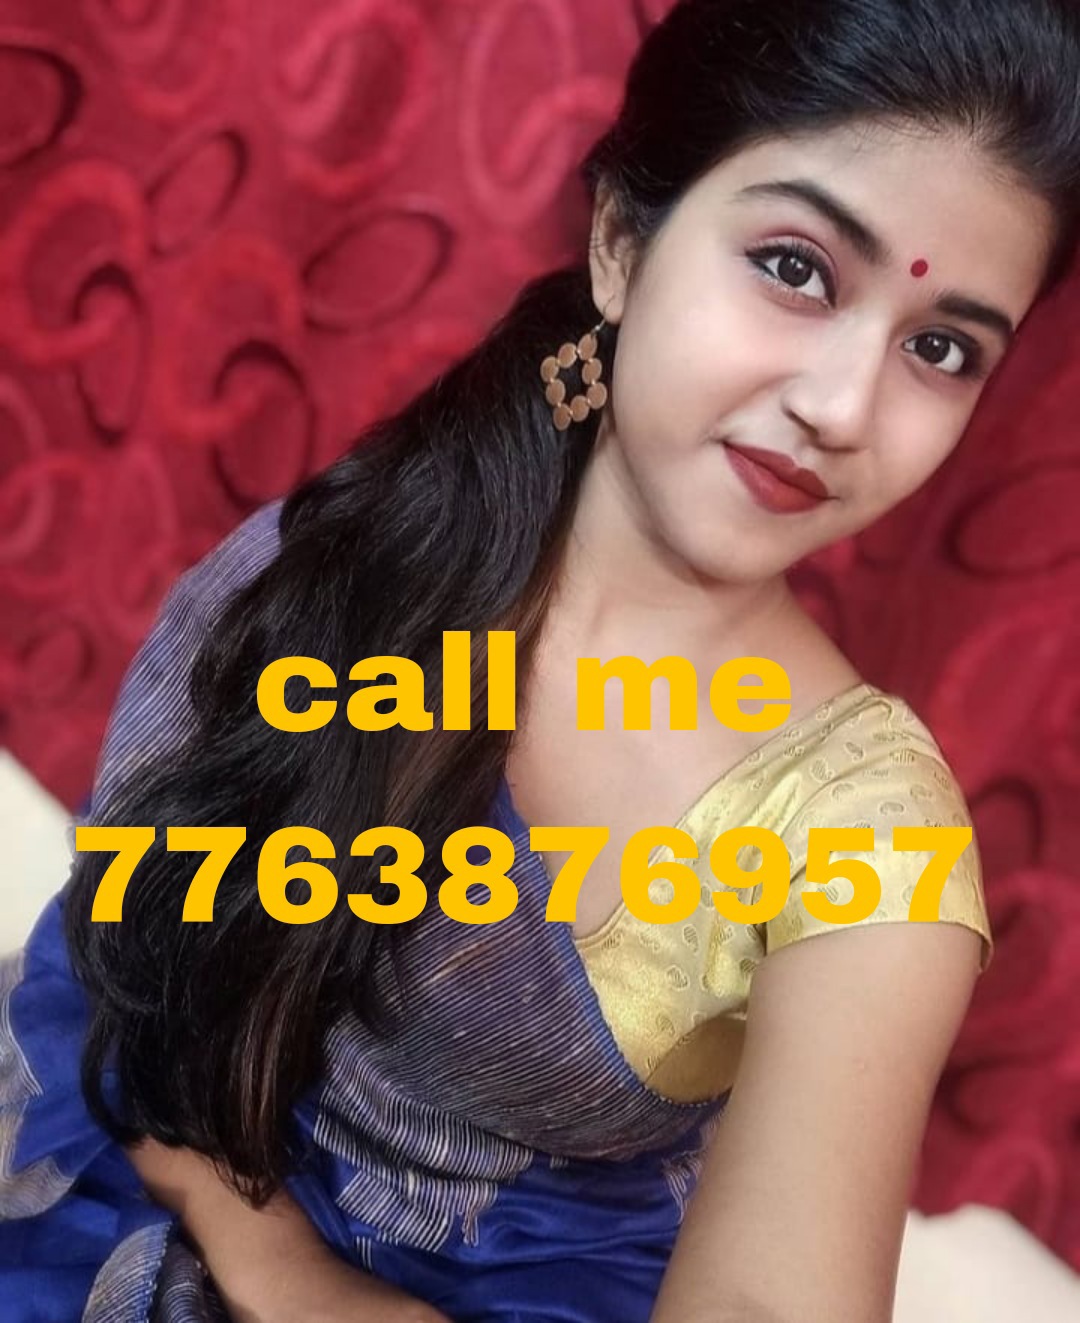 RAIGARH CALL GIRL LOW PRICE CASH PAYMENT SERVICE AVAILABLE 